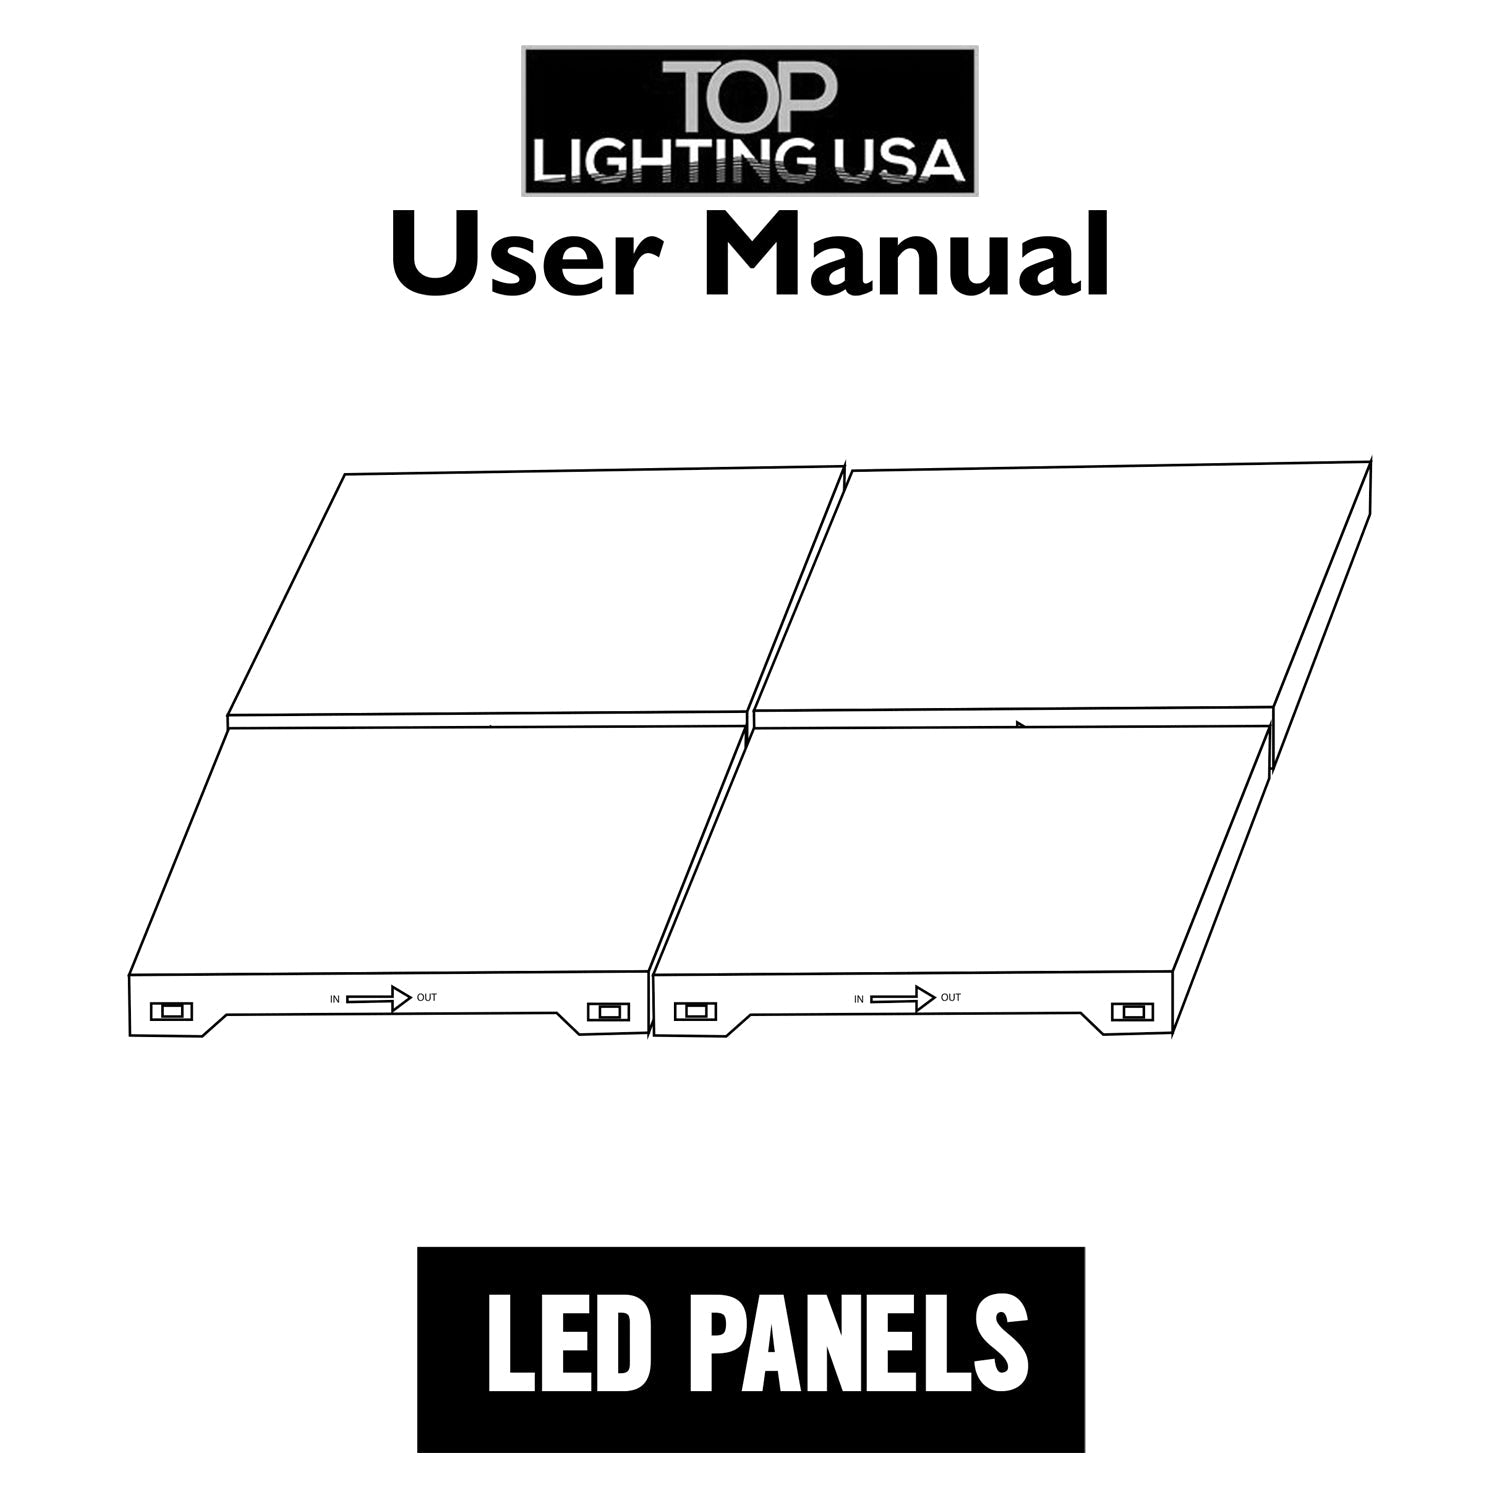 20x20ft 144 Panels 3D Infinity & Solid Top Light DJ Wireless LED Disco Dance Floor – Strong, Durable, and Water Resistant